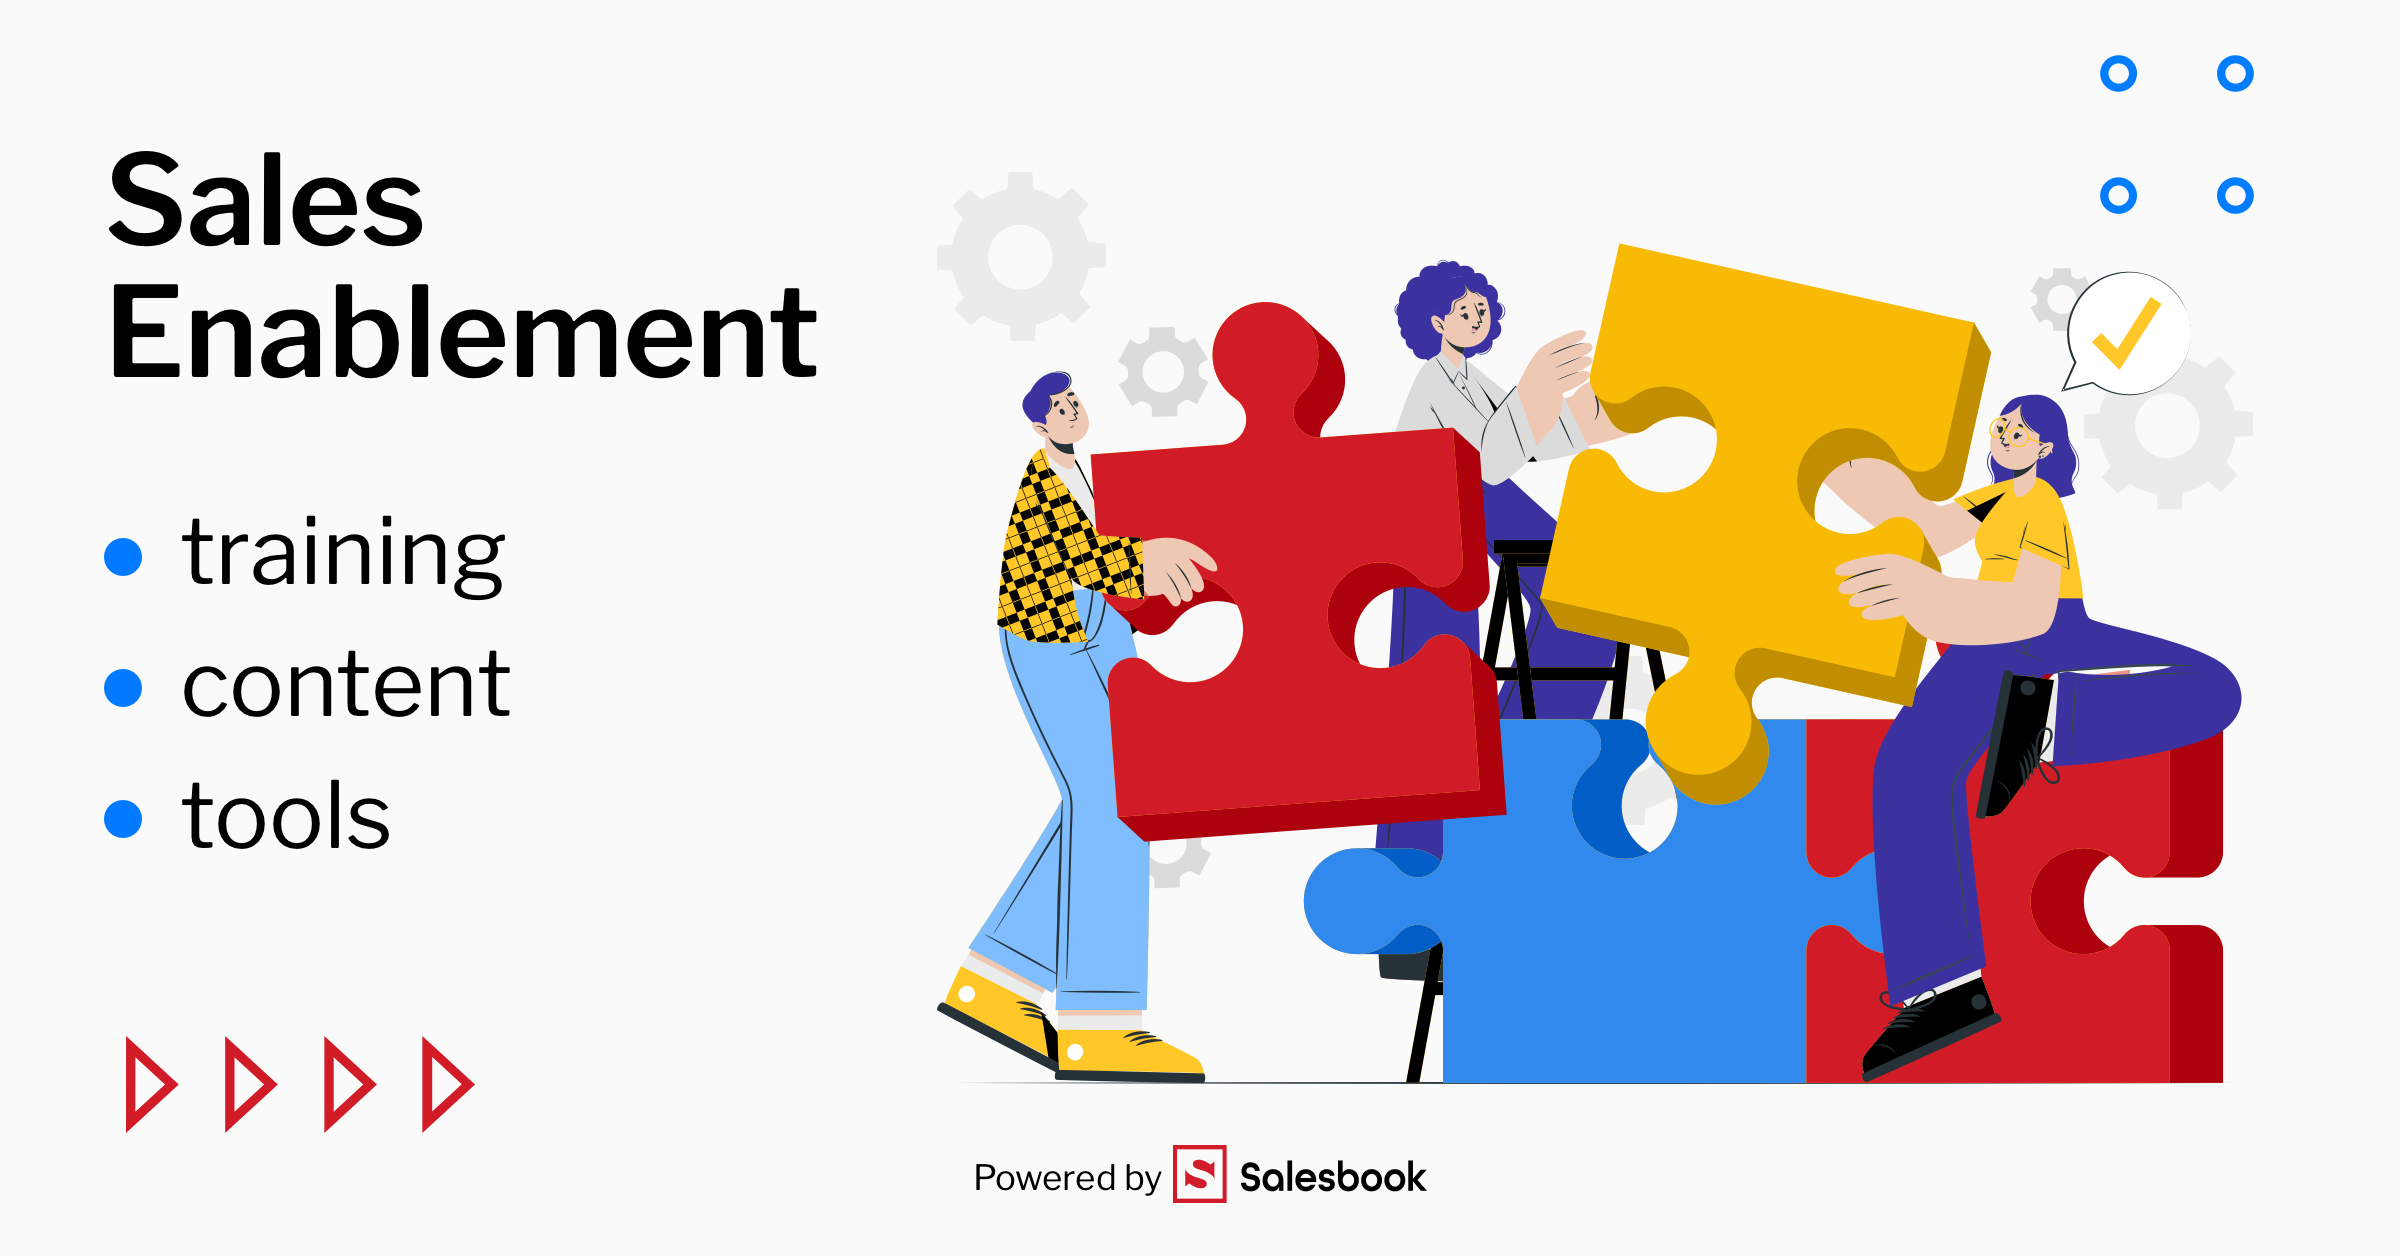 Sales Enablement consists of content, tools and training